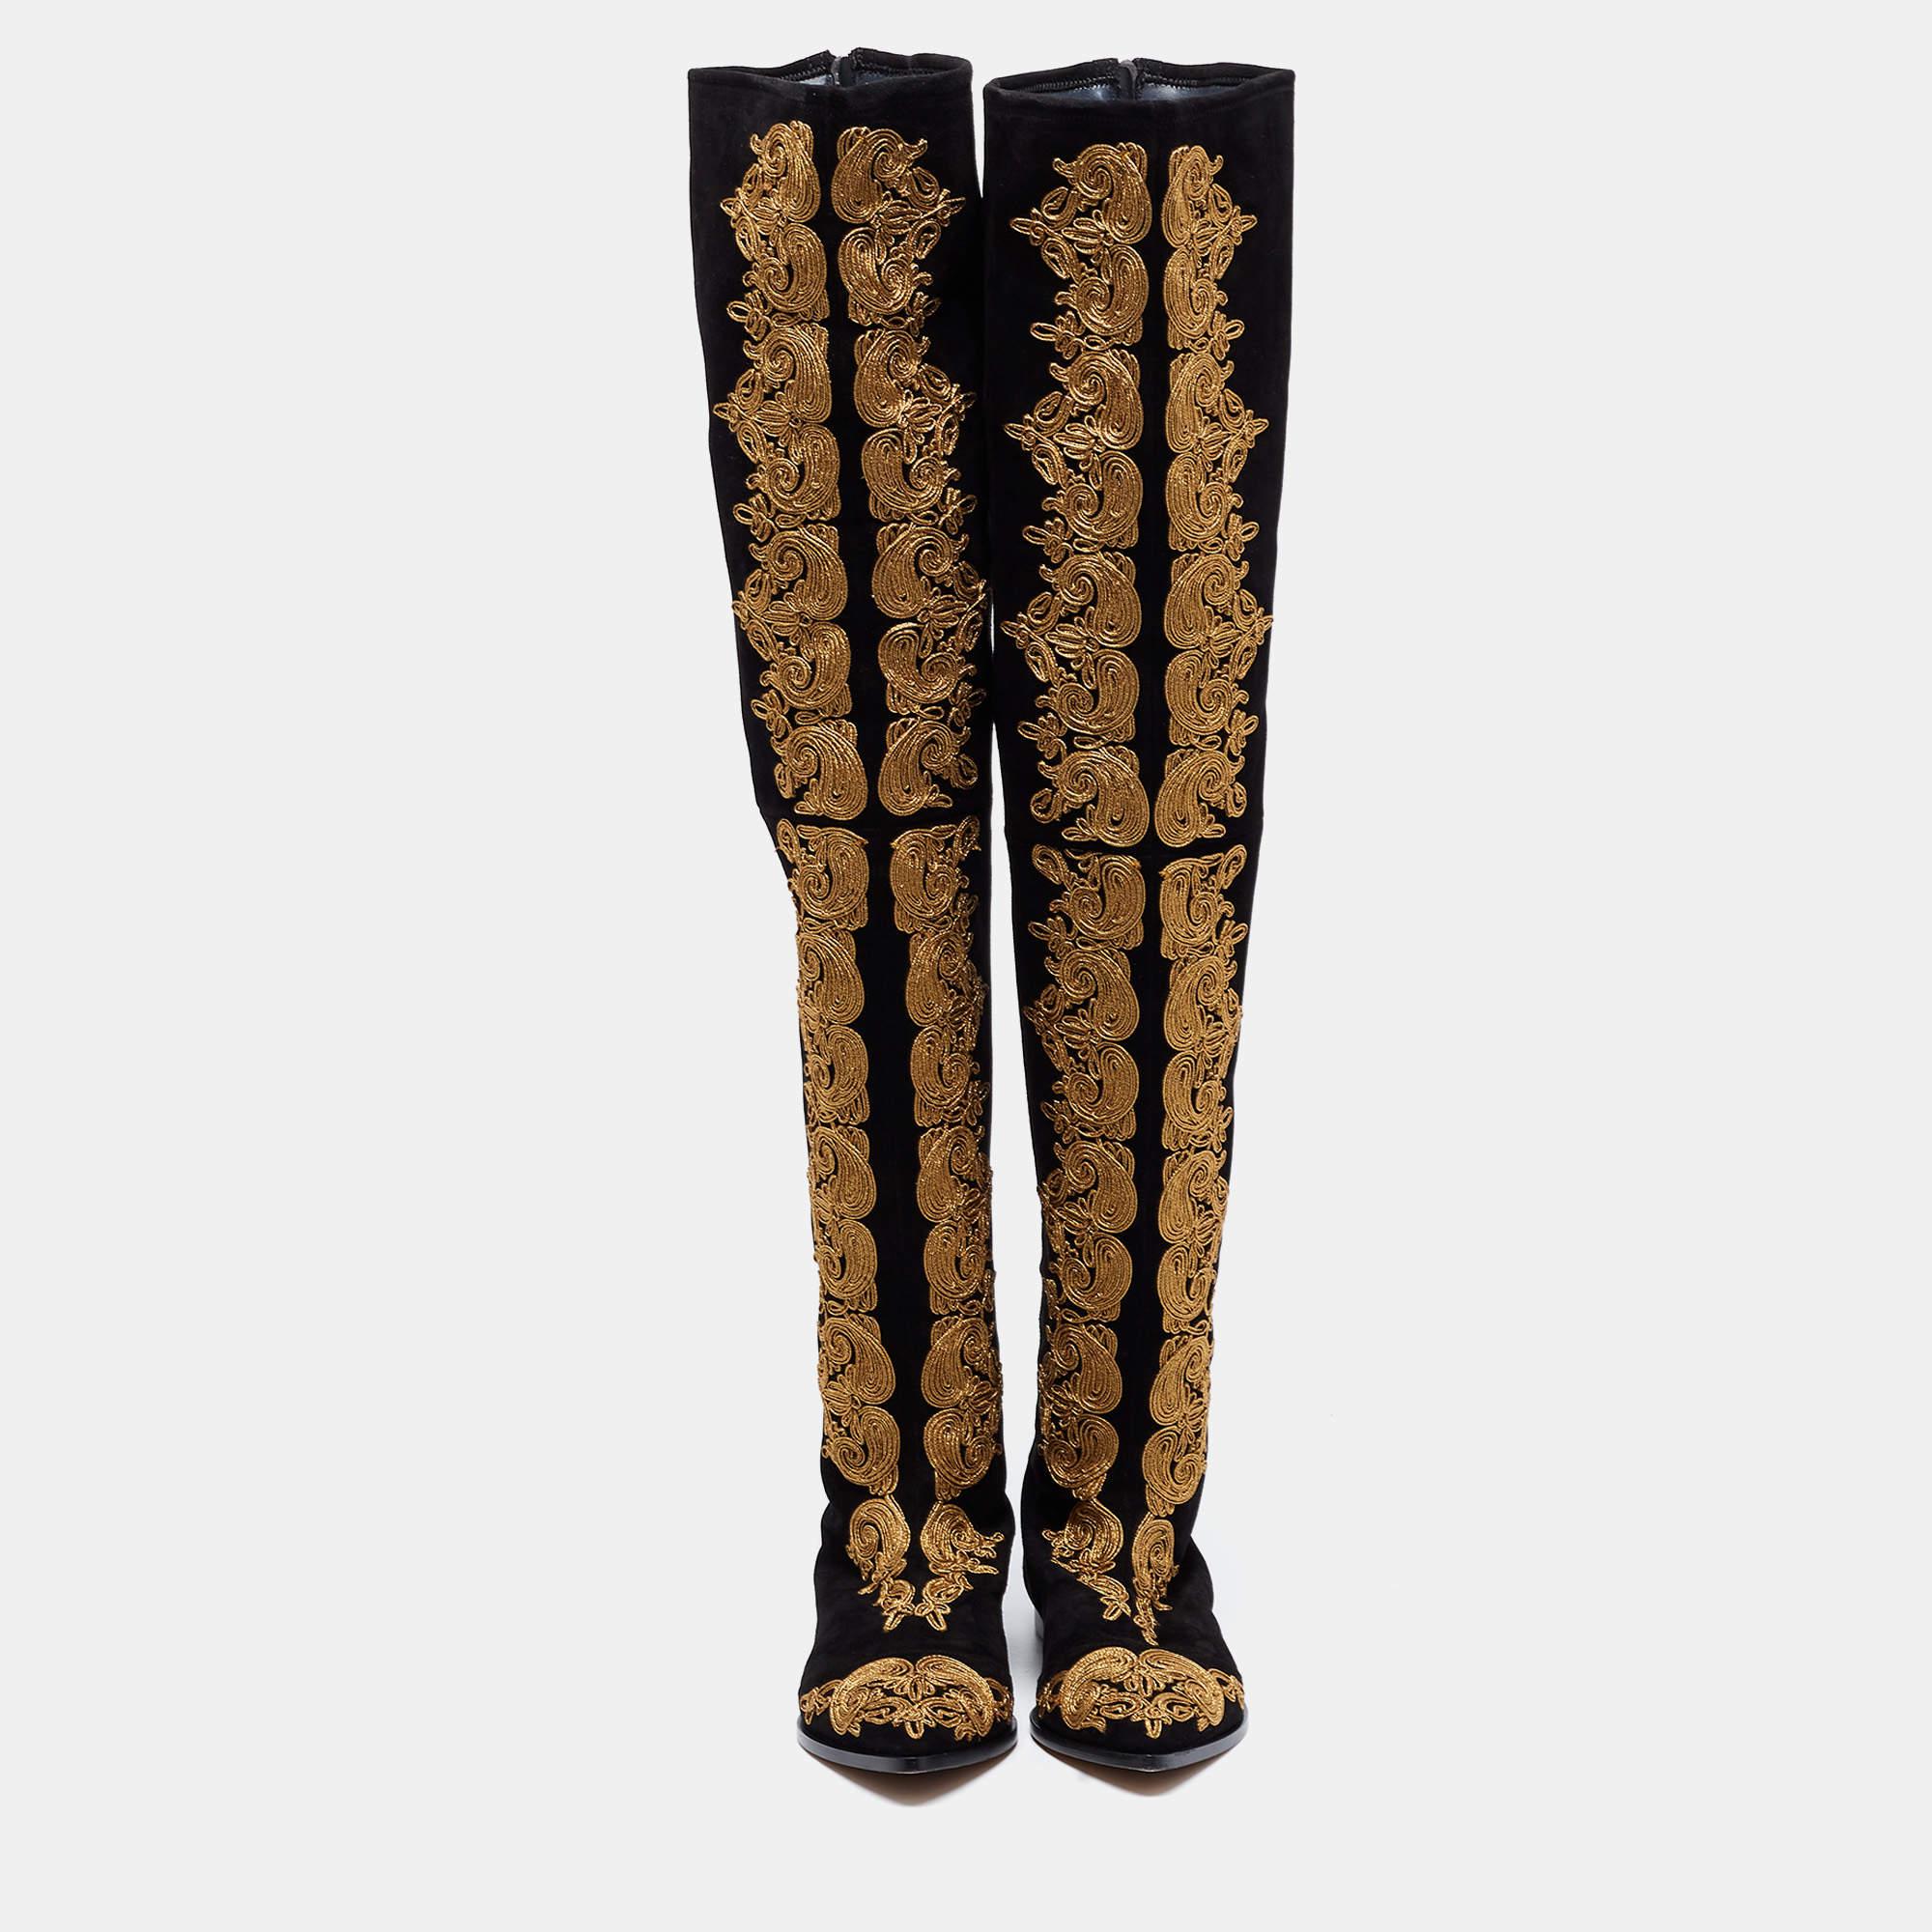 Etro brings you these boots to finish your looks in style and sophistication. They are made from black suede into a thigh-high silhouette and styled with Paisley embroidery. Wear them with casual outfits for a boho-chic look.

Includes: Original Box
